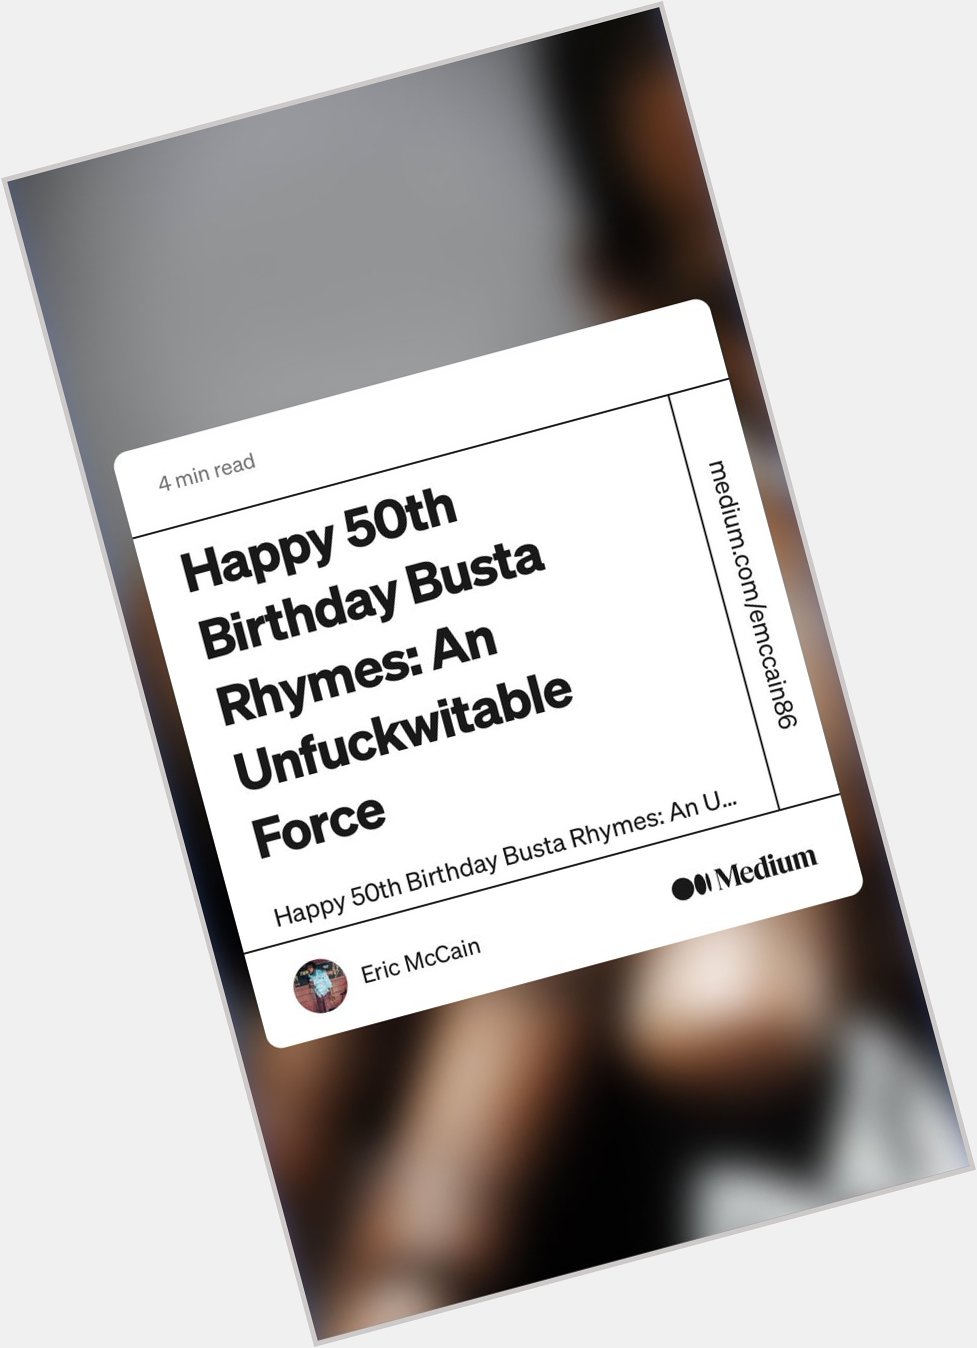  Happy 50th Birthday Busta Rhymes: An Unfuckwitable Force by Eric McCain
 